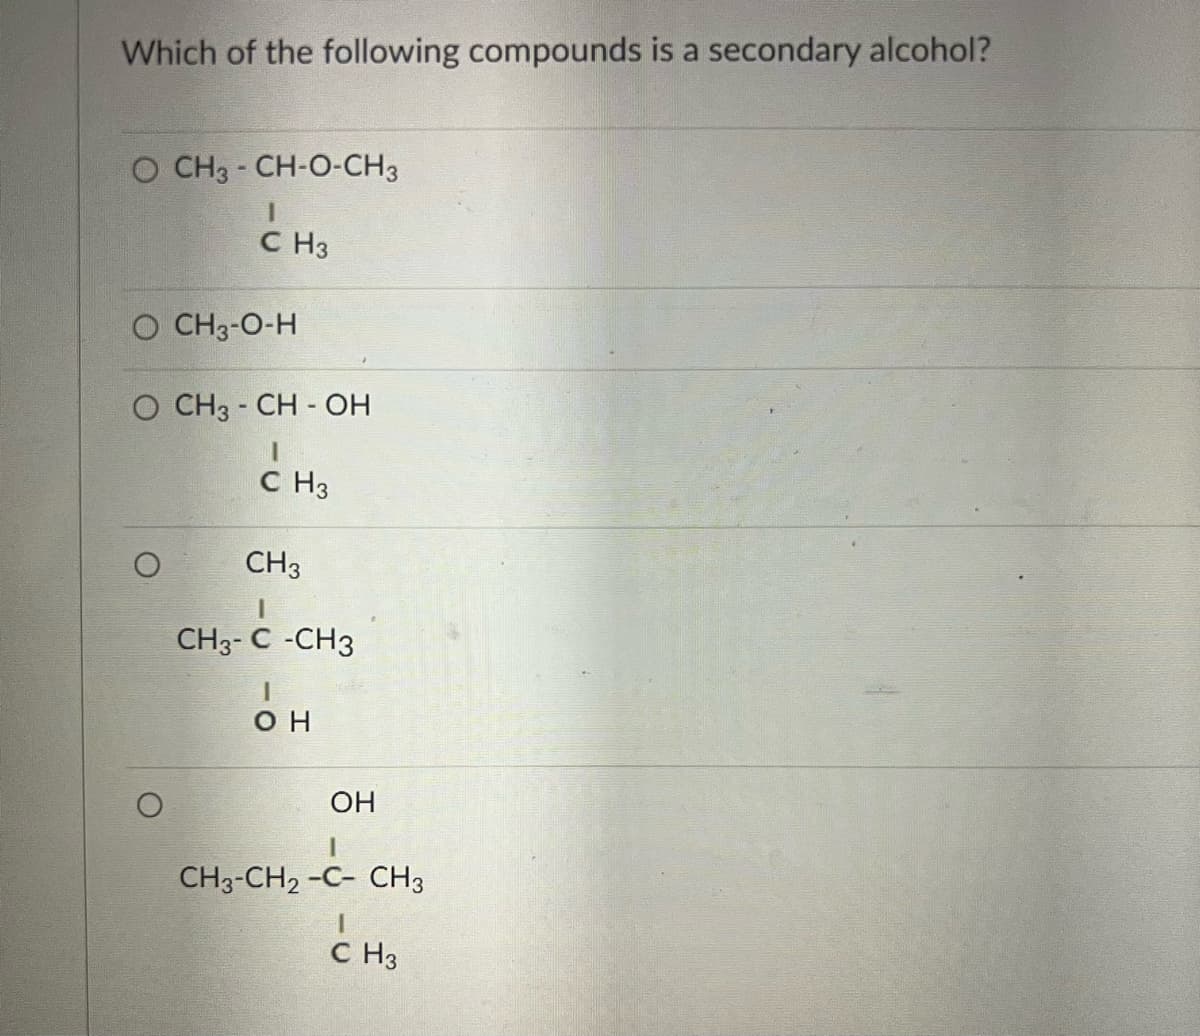 Which of the following compounds is a secondary alcohol?
O CH3 -CH-O-CH3
с на
0 CH3-0-н
O CH3 -CH-OH
I
C H3
CH3
I
CH3-C -CH3
I
он
ОН
I
CH3-CH ₂ -C- CH3
I
C H3